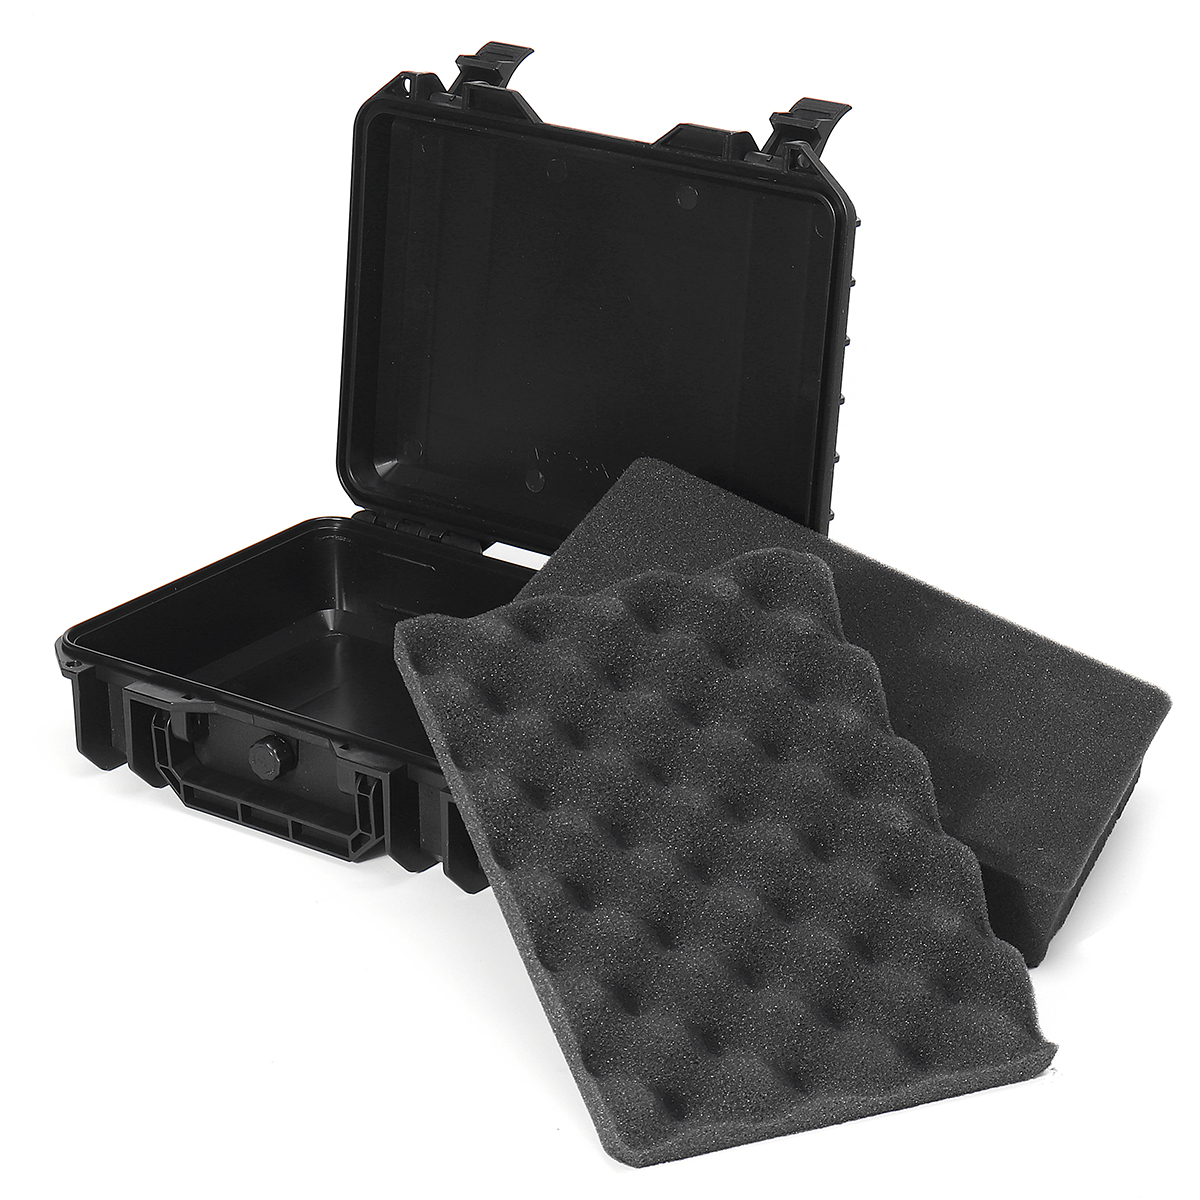 Waterproof-Hard-Carrying-Case-Bag-Tool-Storage-Box-Camera-Photography-with-Sponge-1664833-1